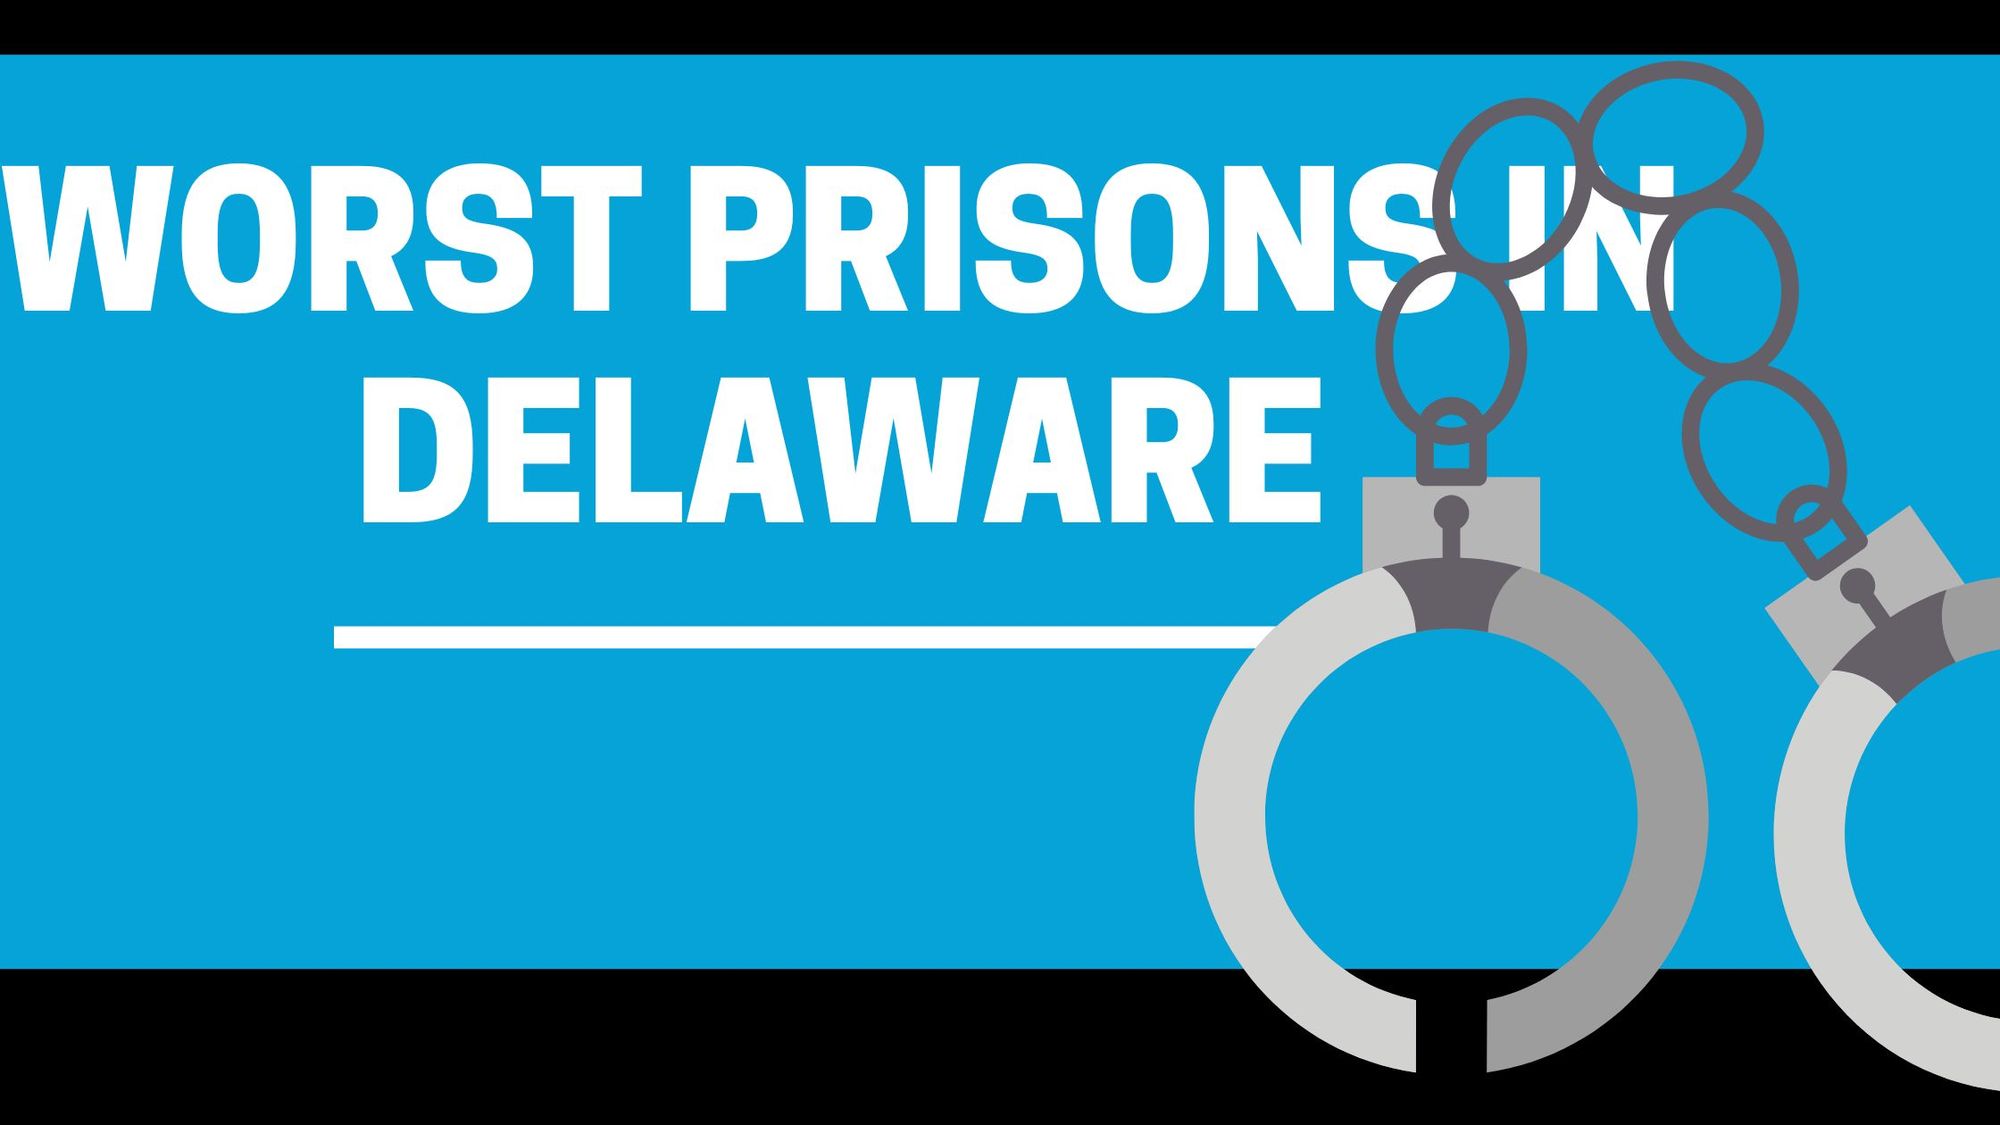 9 Worst Prisons In The State of Delaware